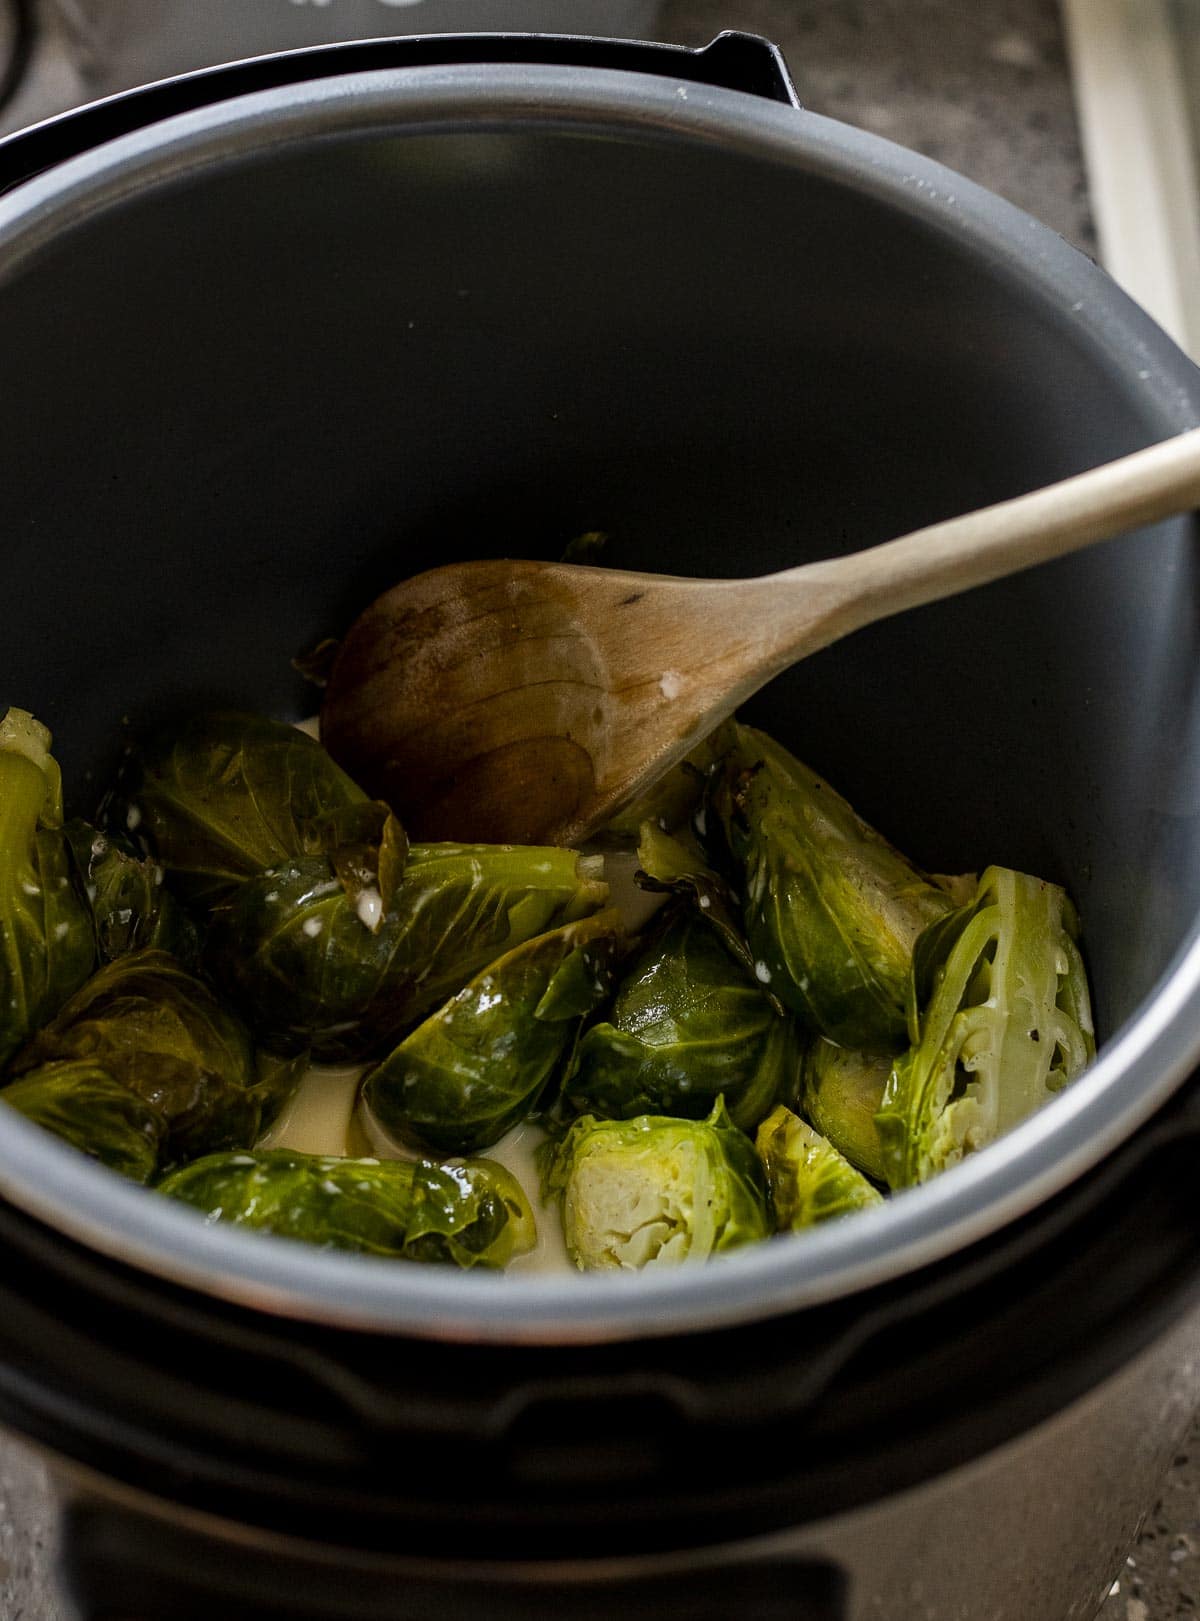 Cooked brussels sprouts in the Instant Pot.